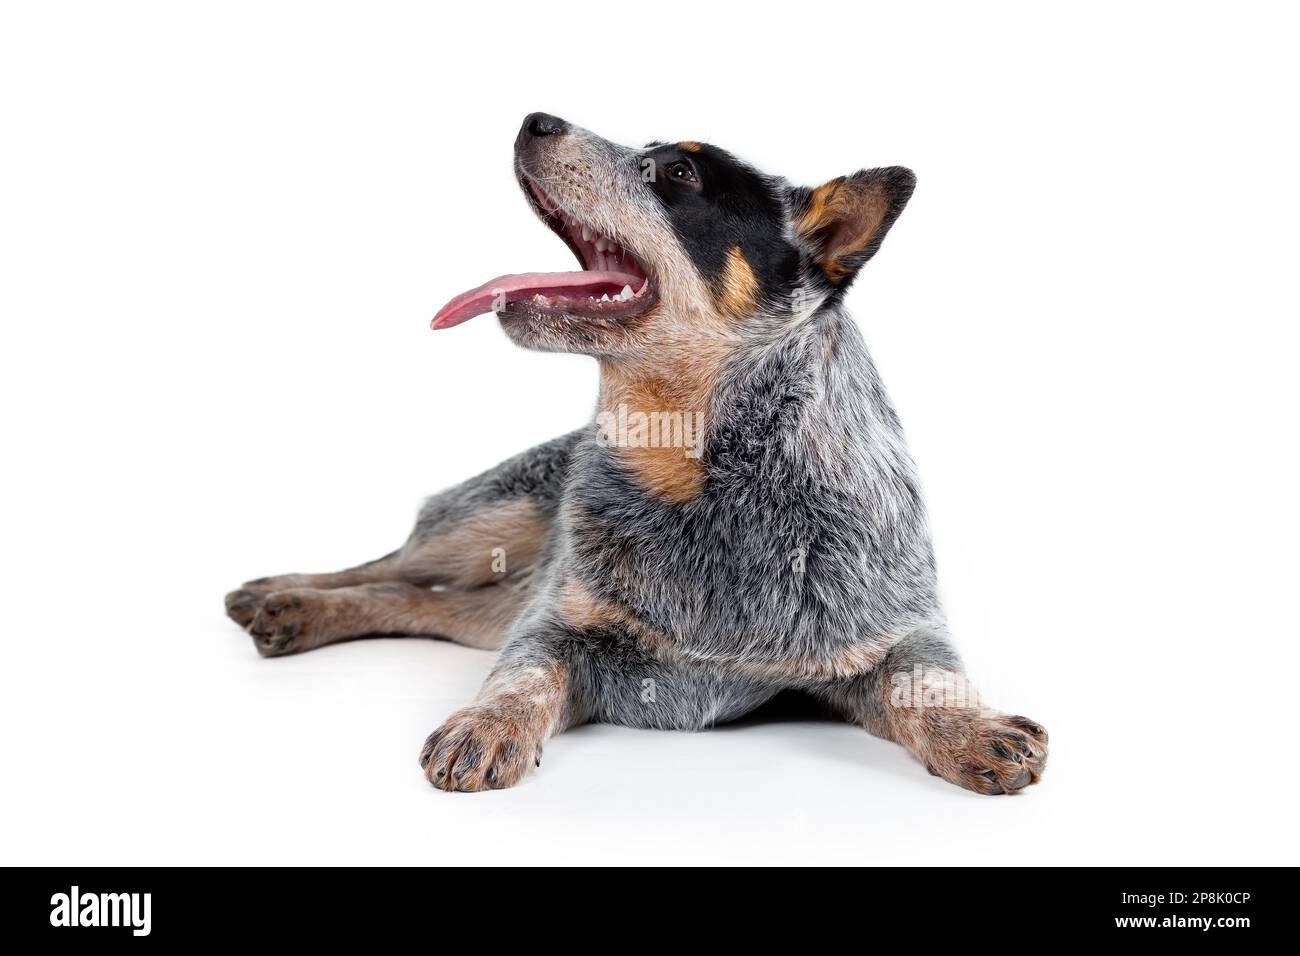 Cute happy blue heeler or australian cattle dog puppy with tongue out lying down isolated on white background. Profile view Stock Photo